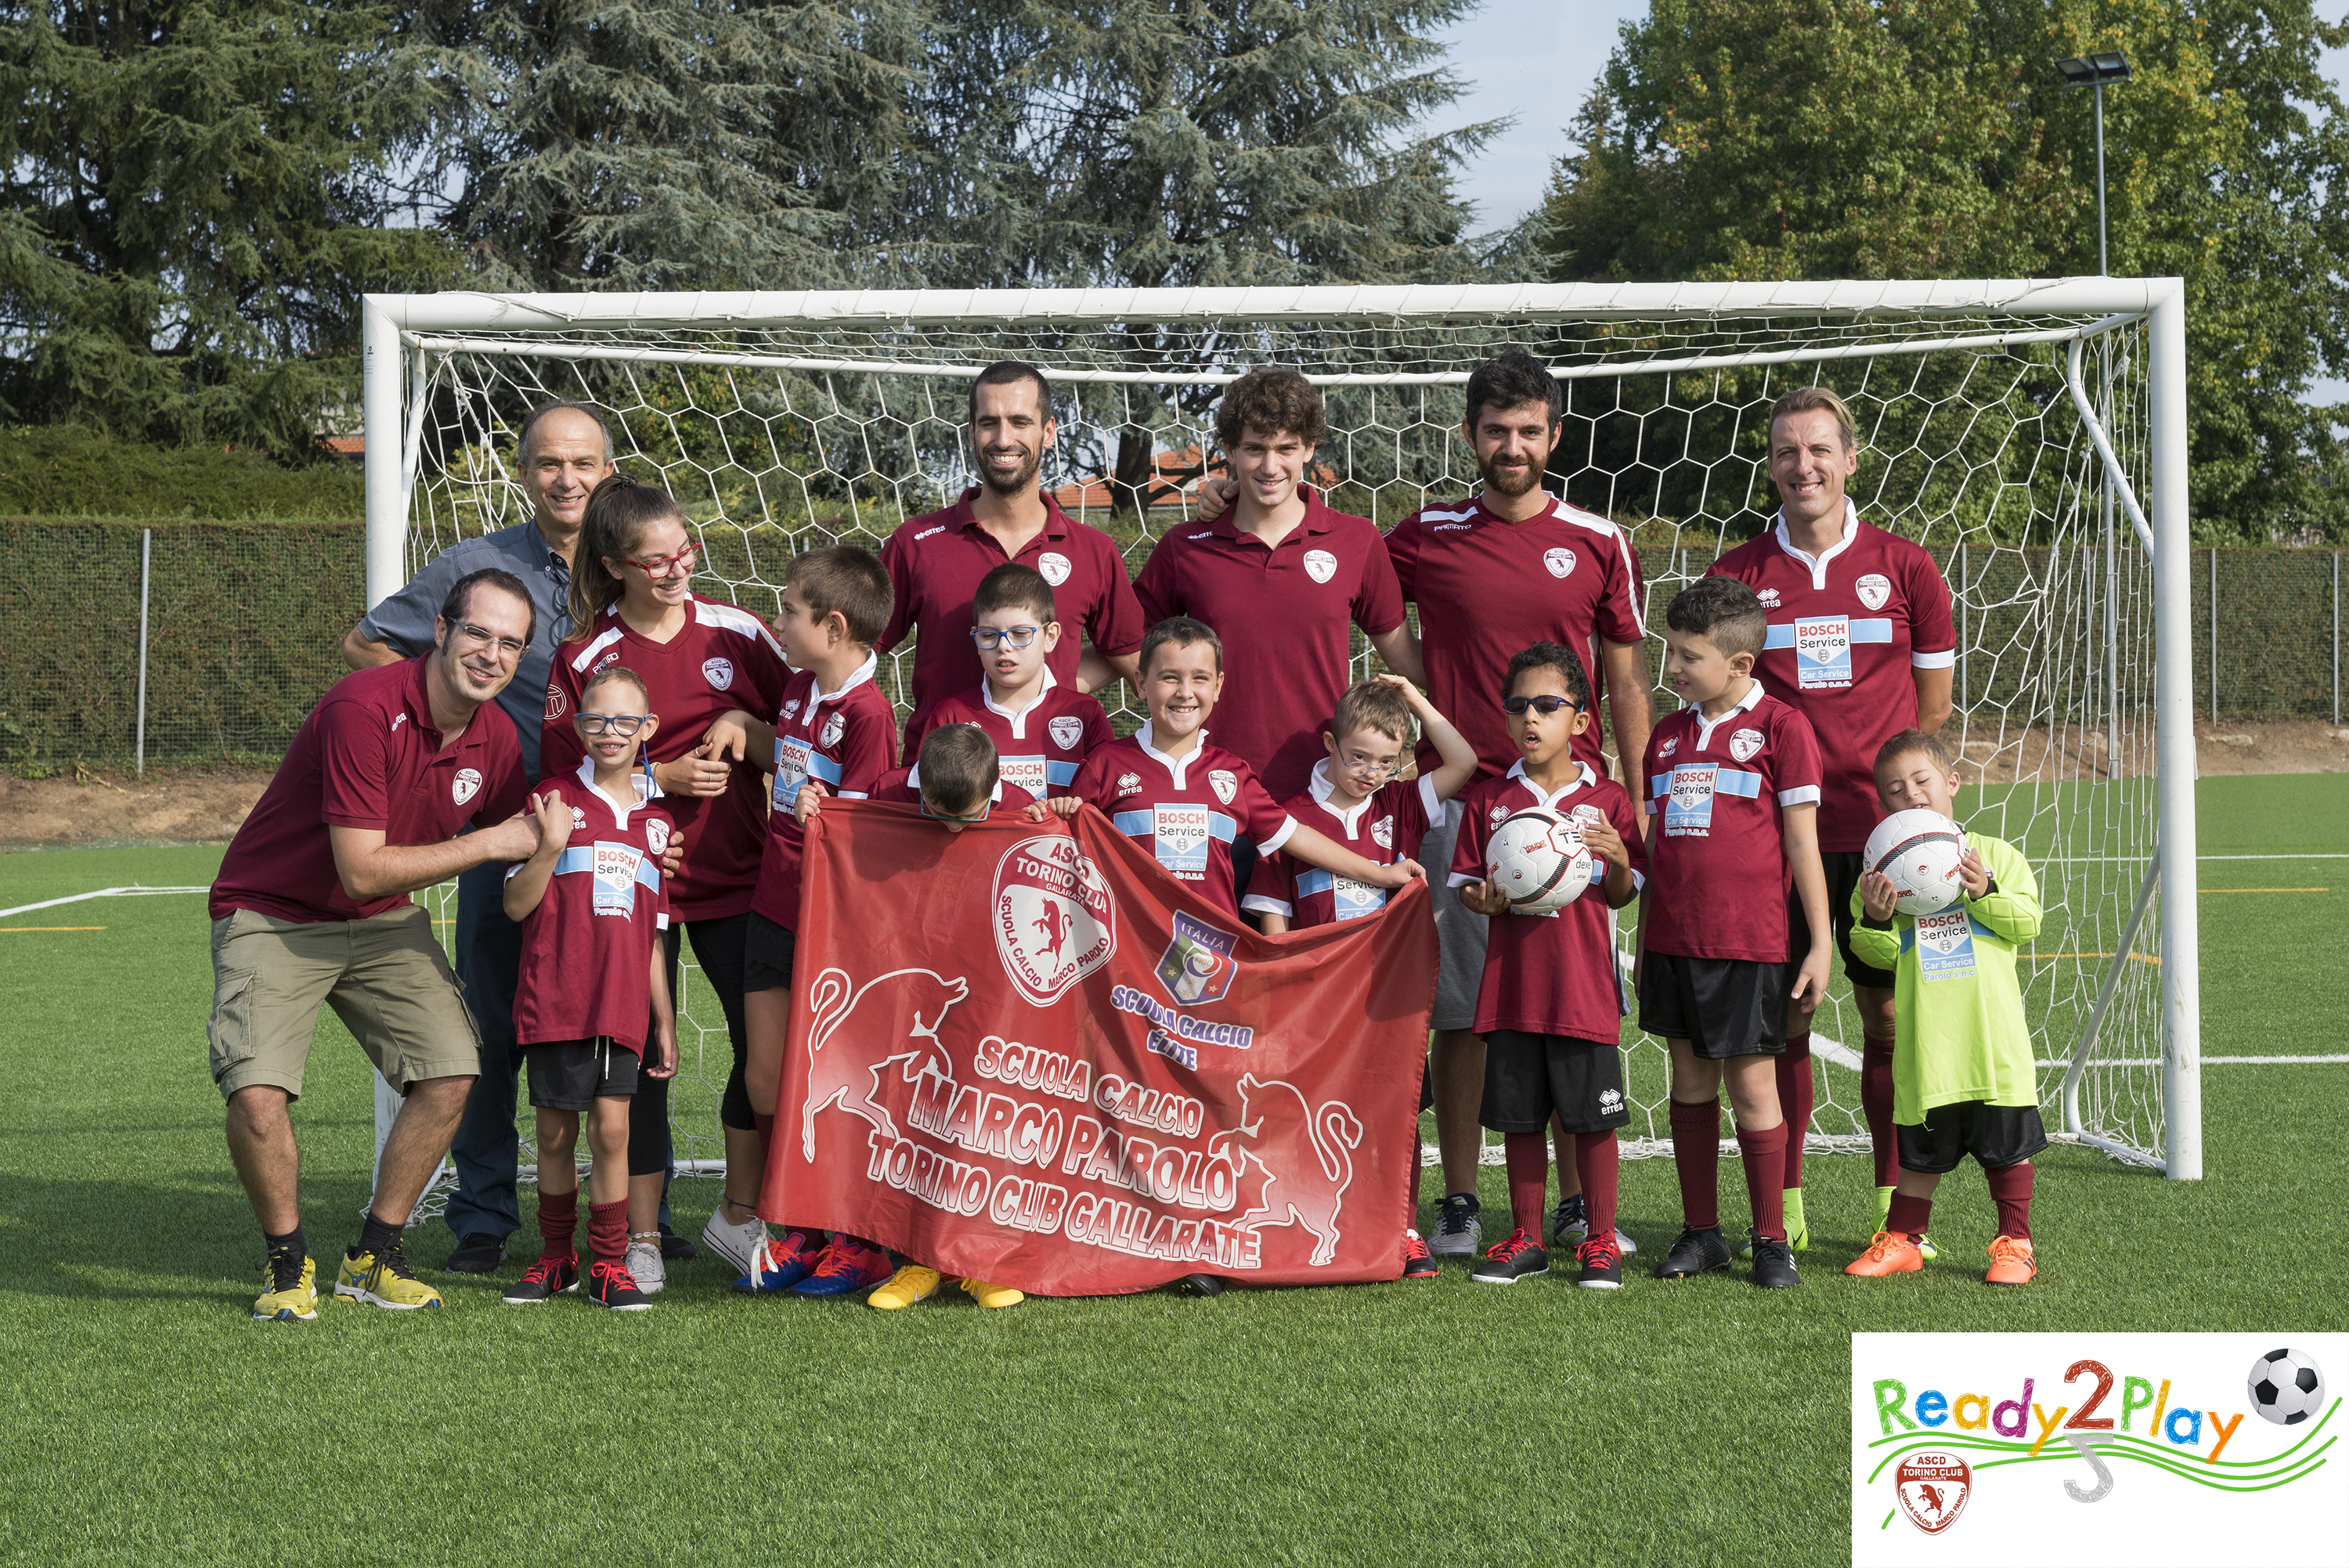 Photo of the football club for children with a learning disability in Italy called Ready2Play